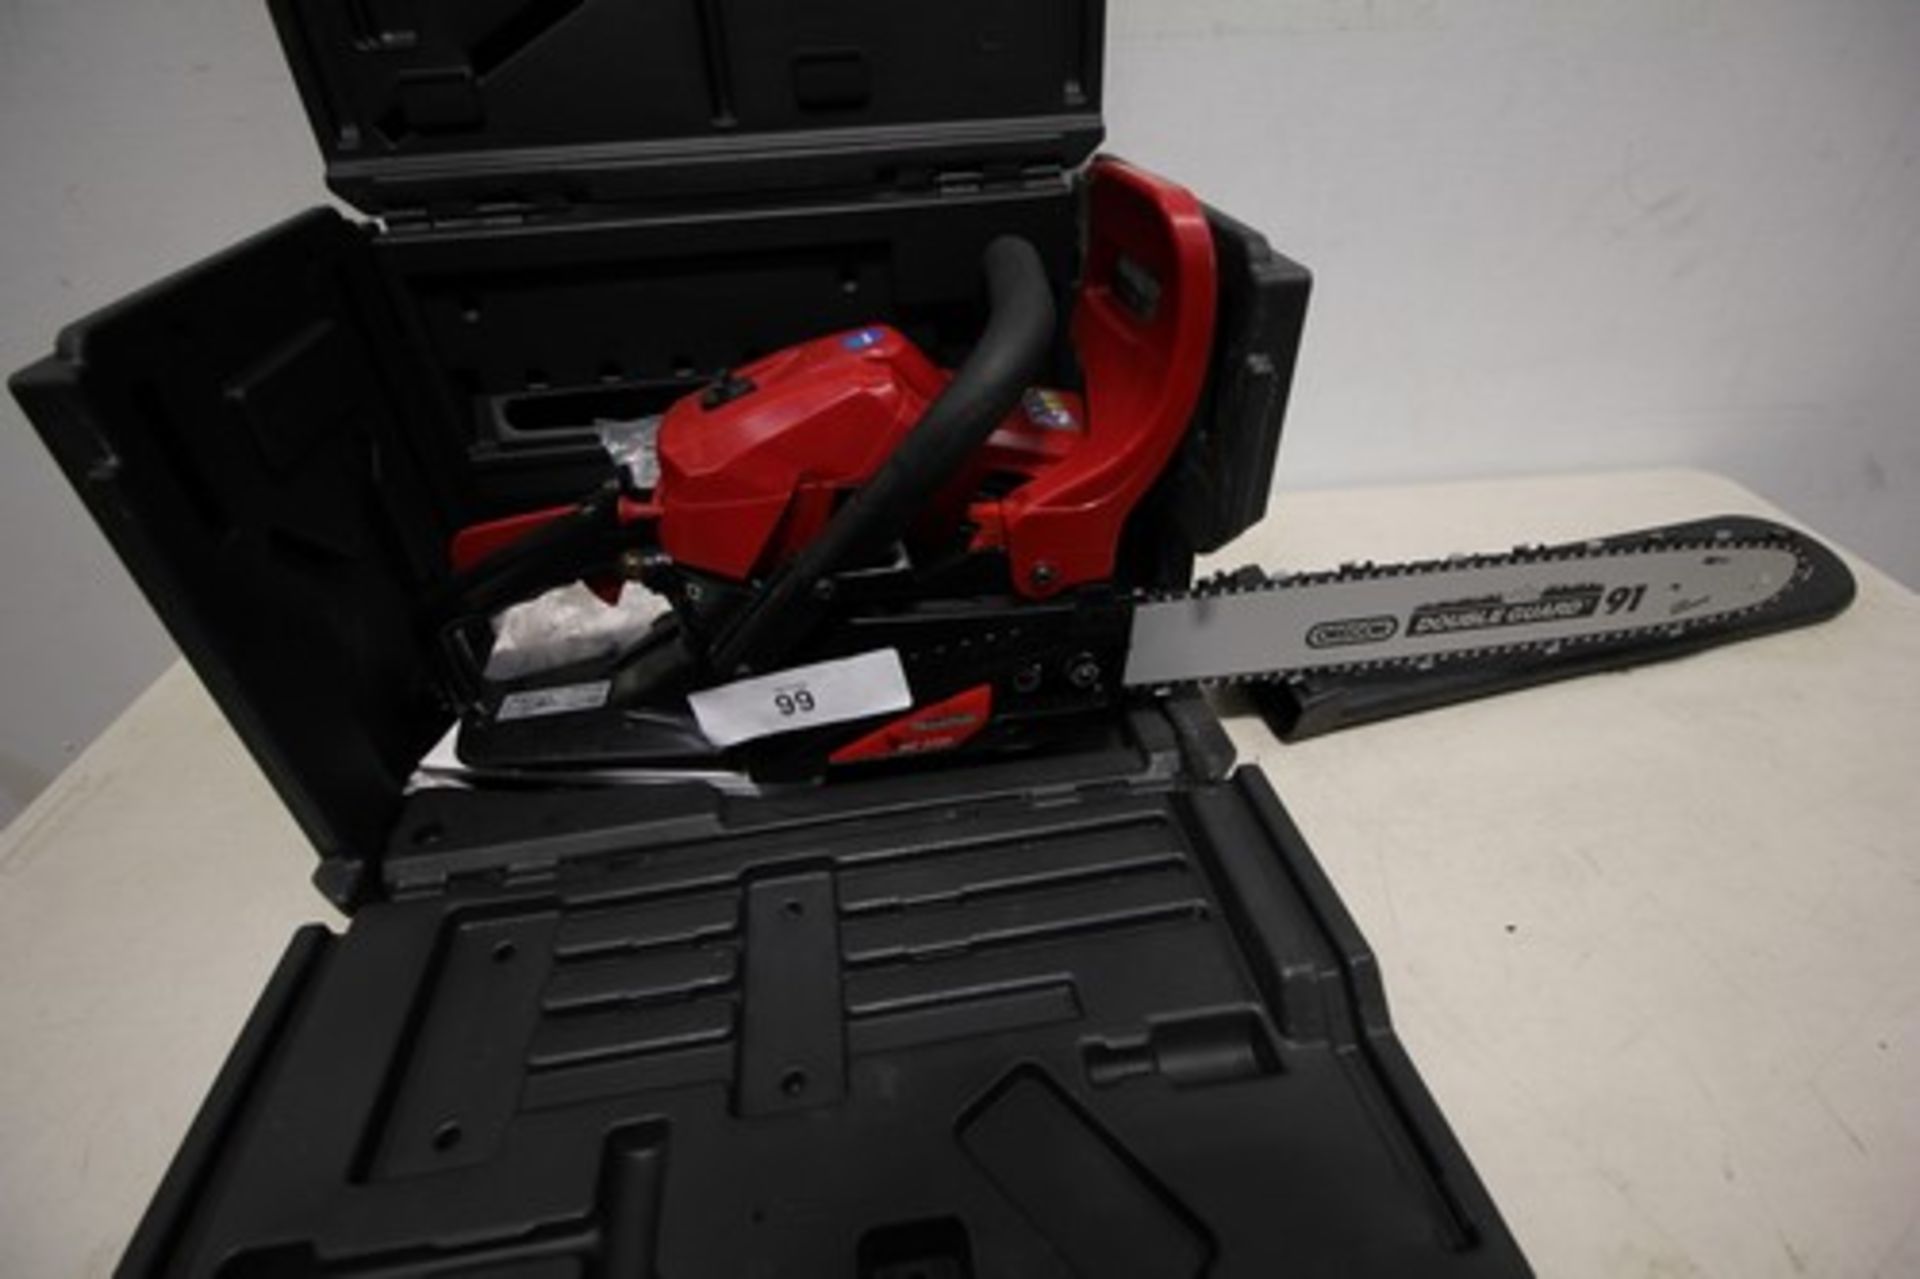 1 x Mountfield petrol chain saw, model MC3720 in carry case - tested and working - new (ES8) - Image 2 of 3